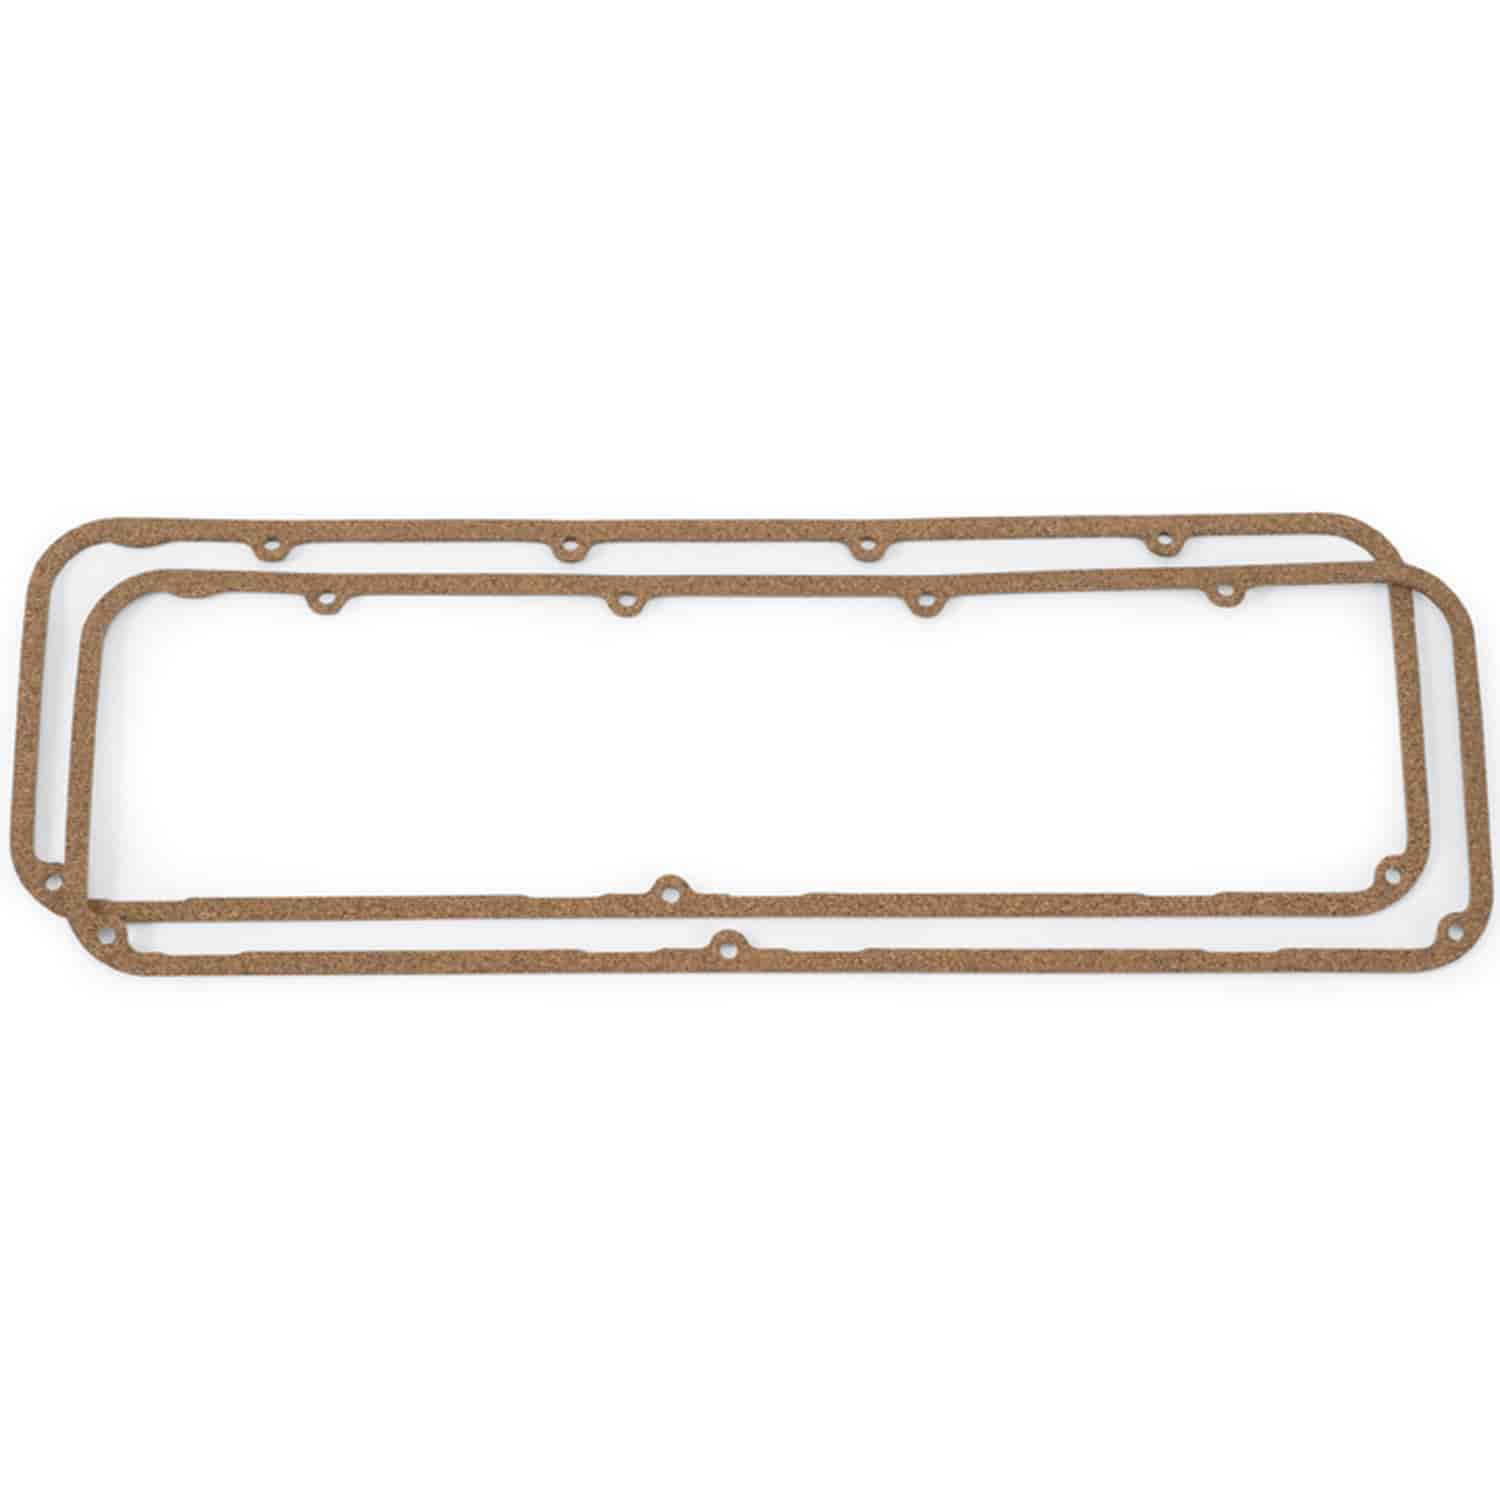 Valve Cover Gaskets for Big Block Chevy with